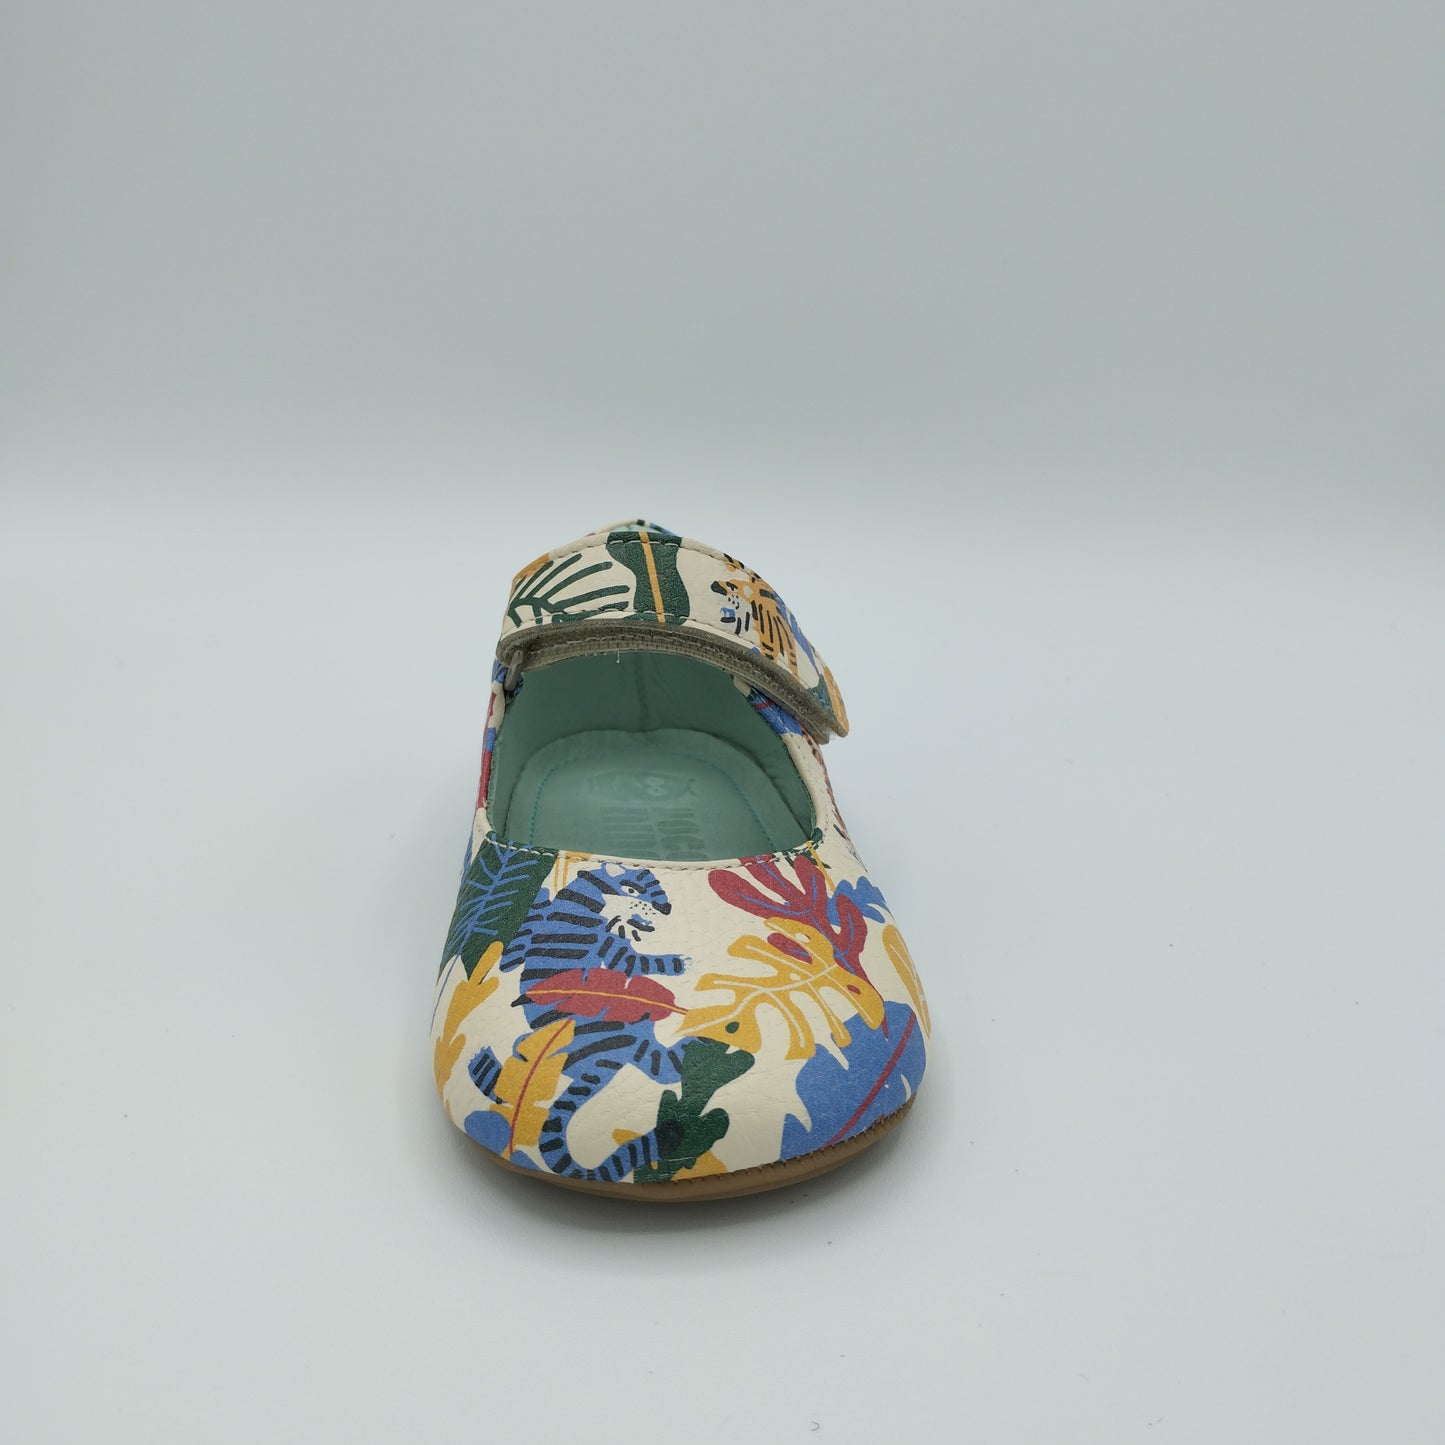 Zapato barefoot - MIGHTY SHOES. RAINBOW TIGER MARY JANE